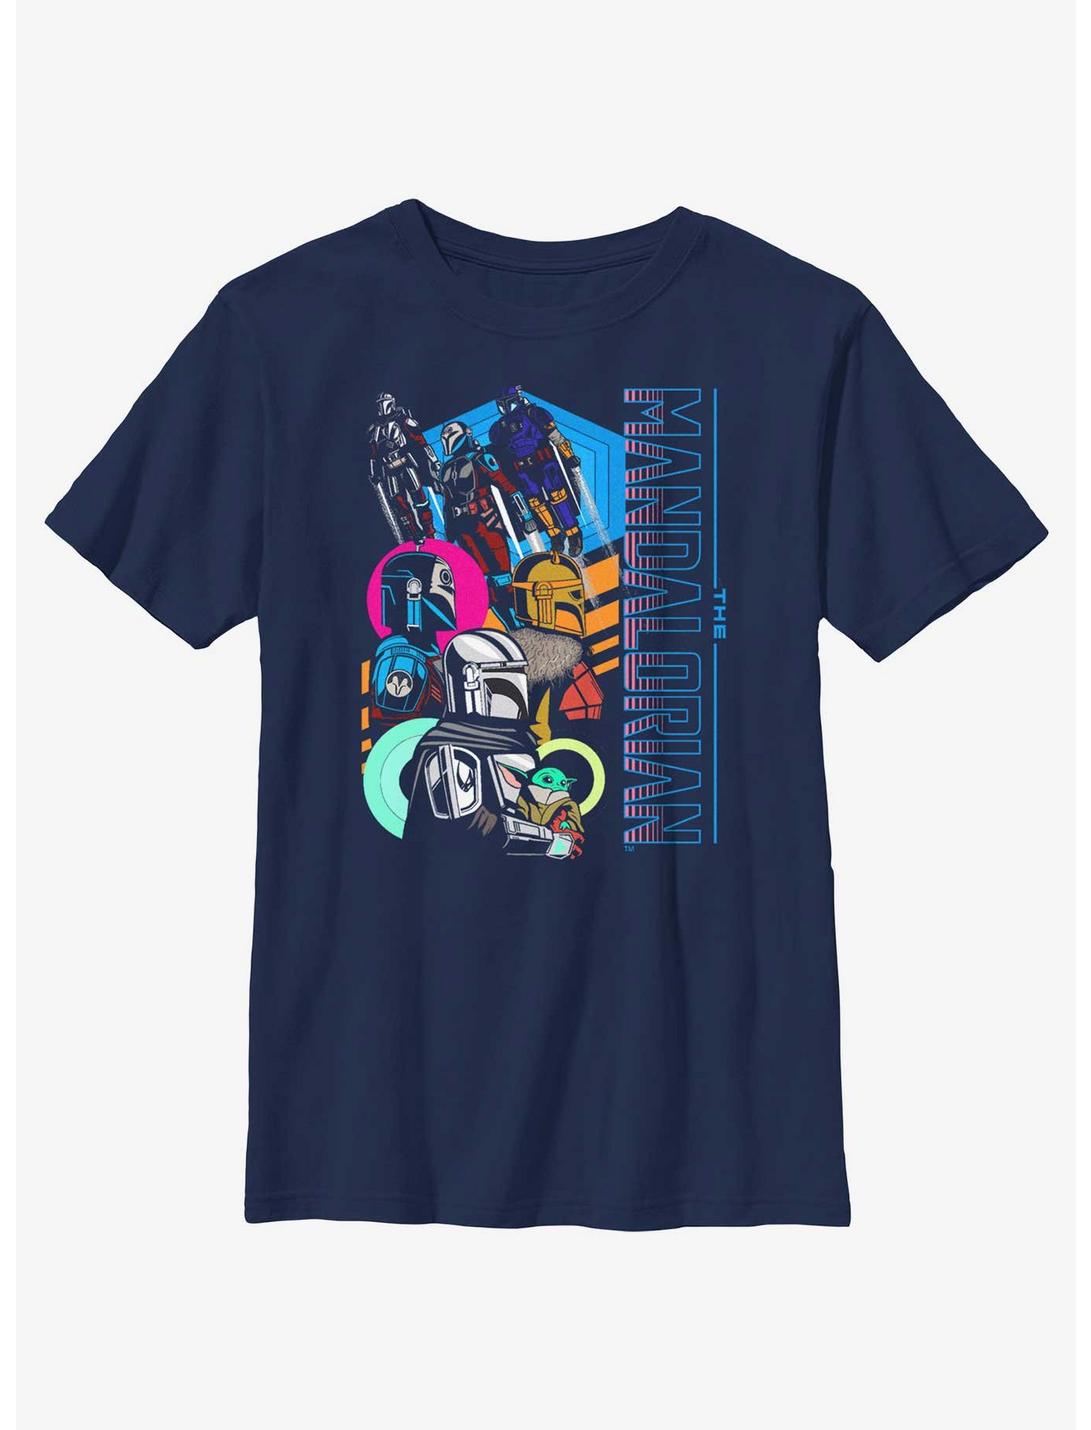 Star Wars The Mandalorian Fearsome Warriors Portrait Youth T-Shirt, NAVY, hi-res